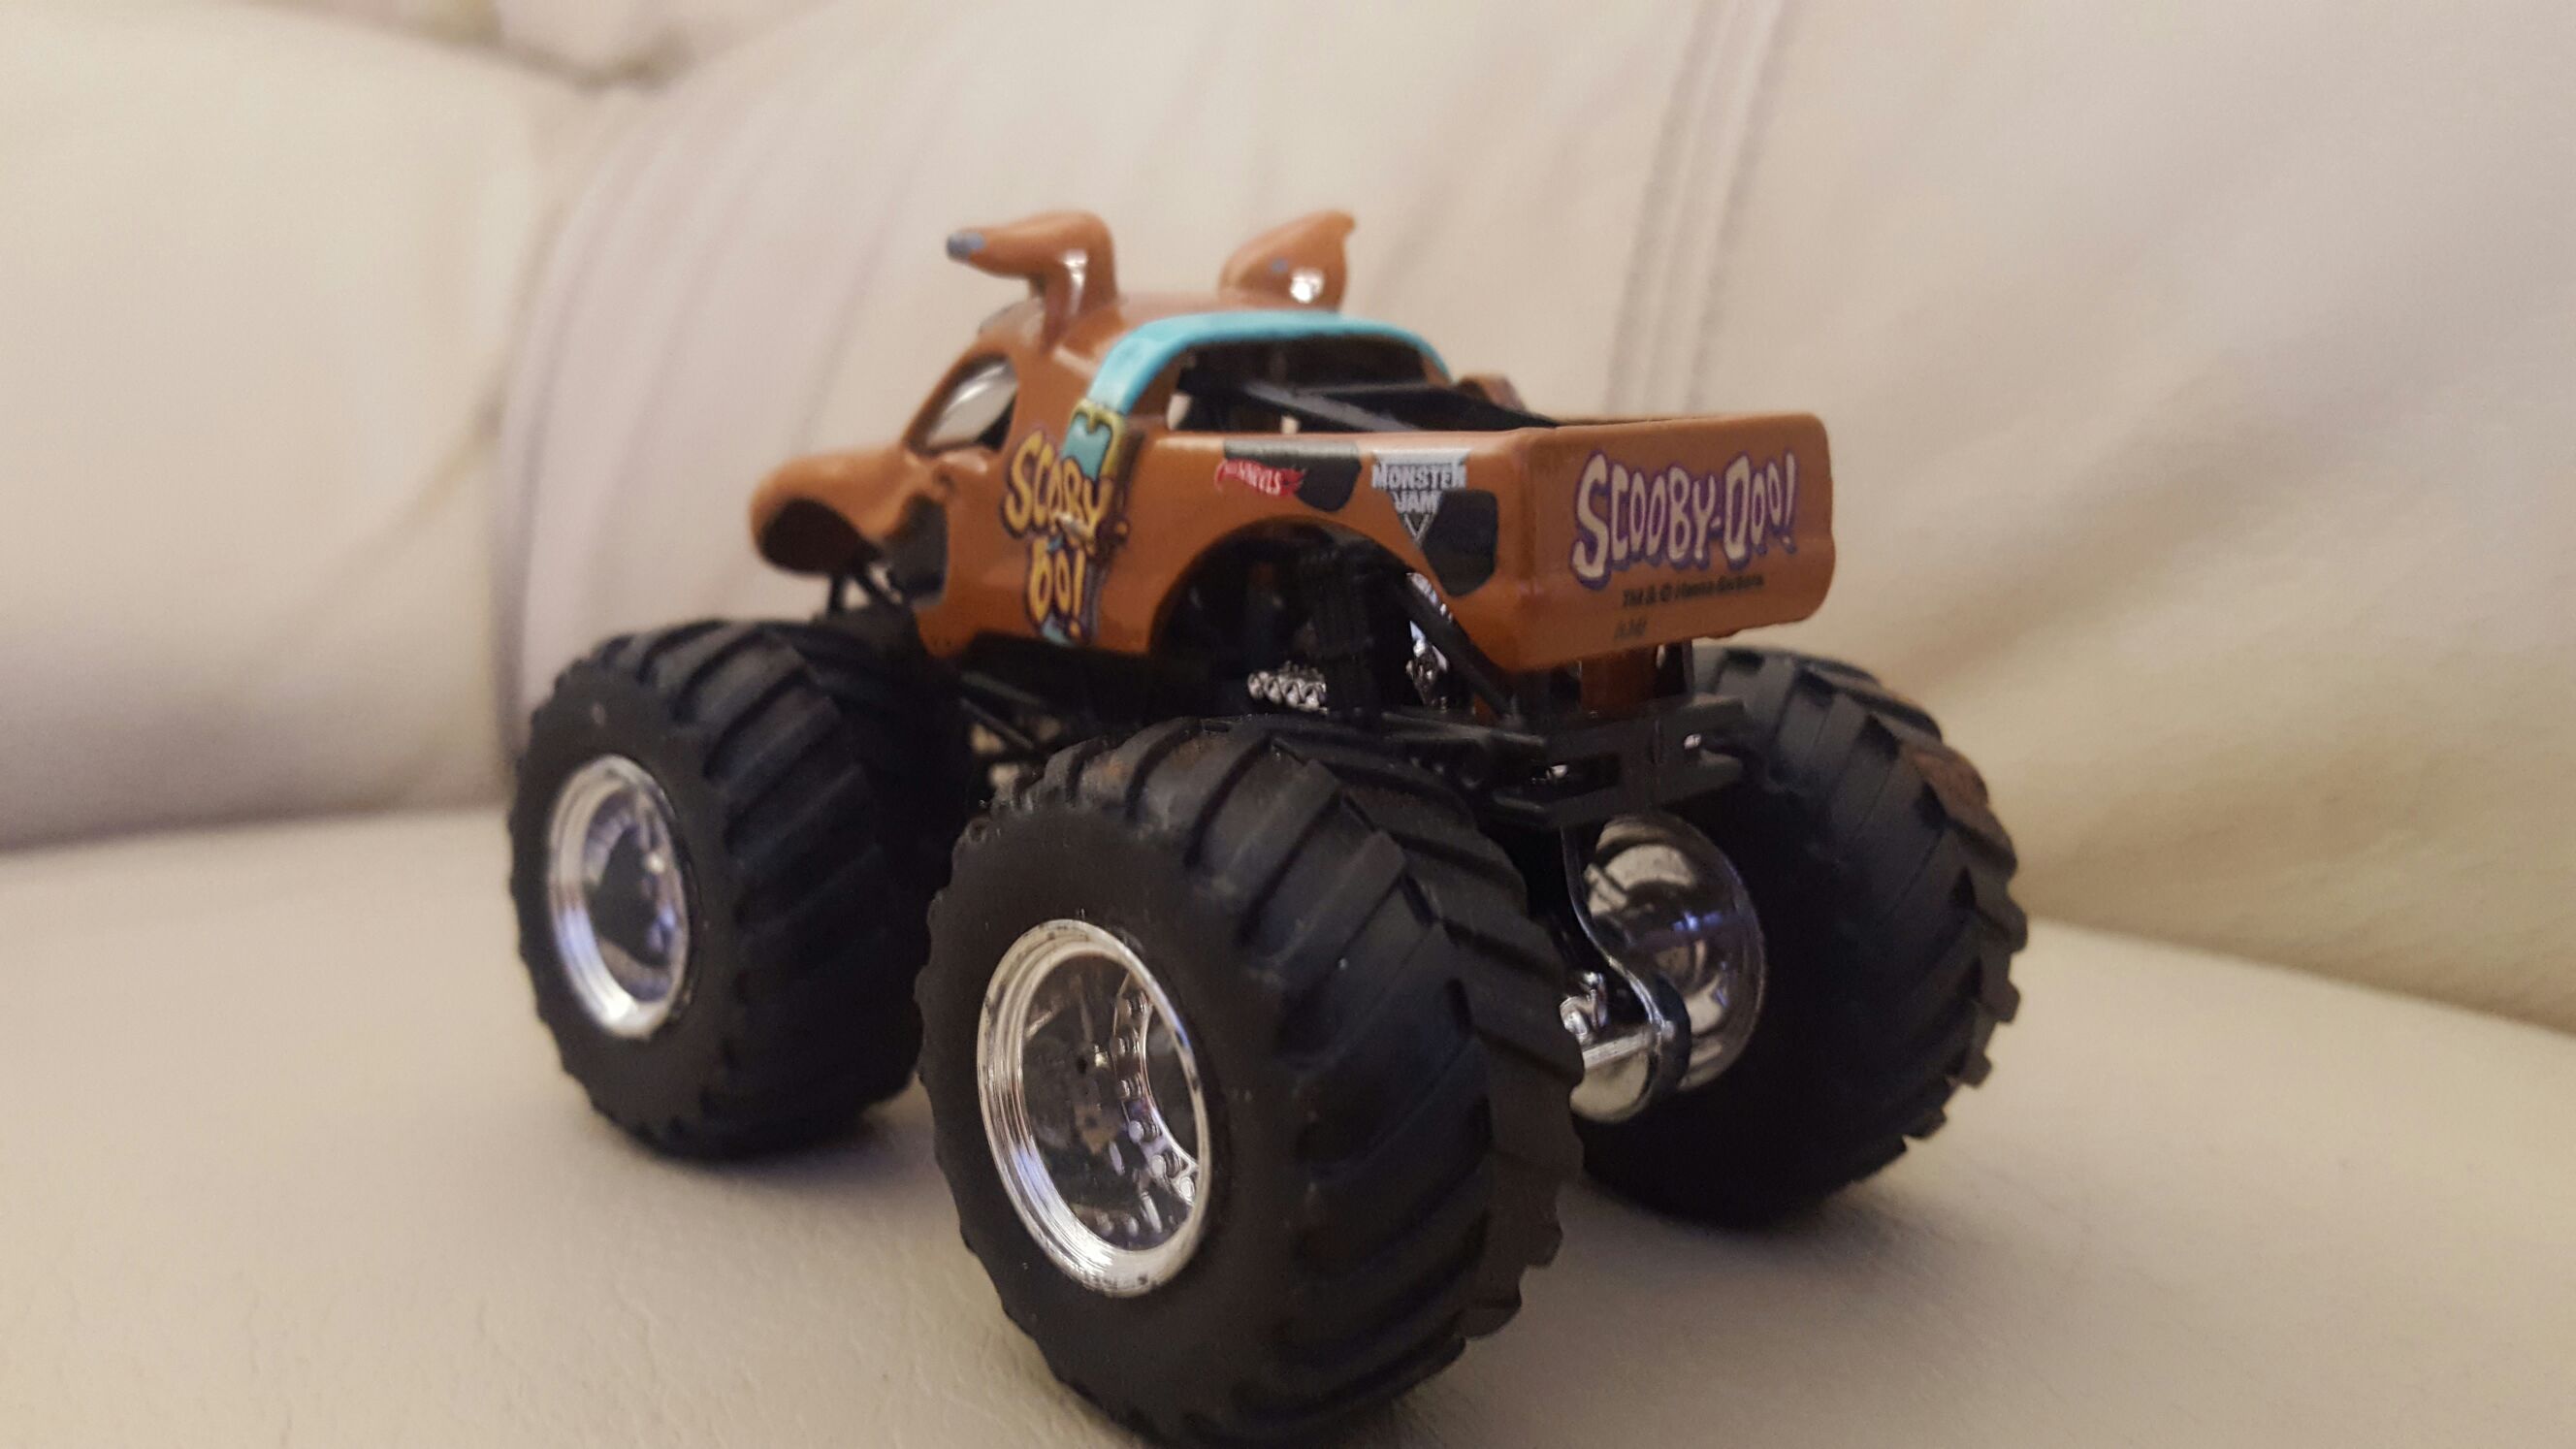 monster jam Scooby- Doo - 2016 Monster Jam toy car collectible - Main Image 2